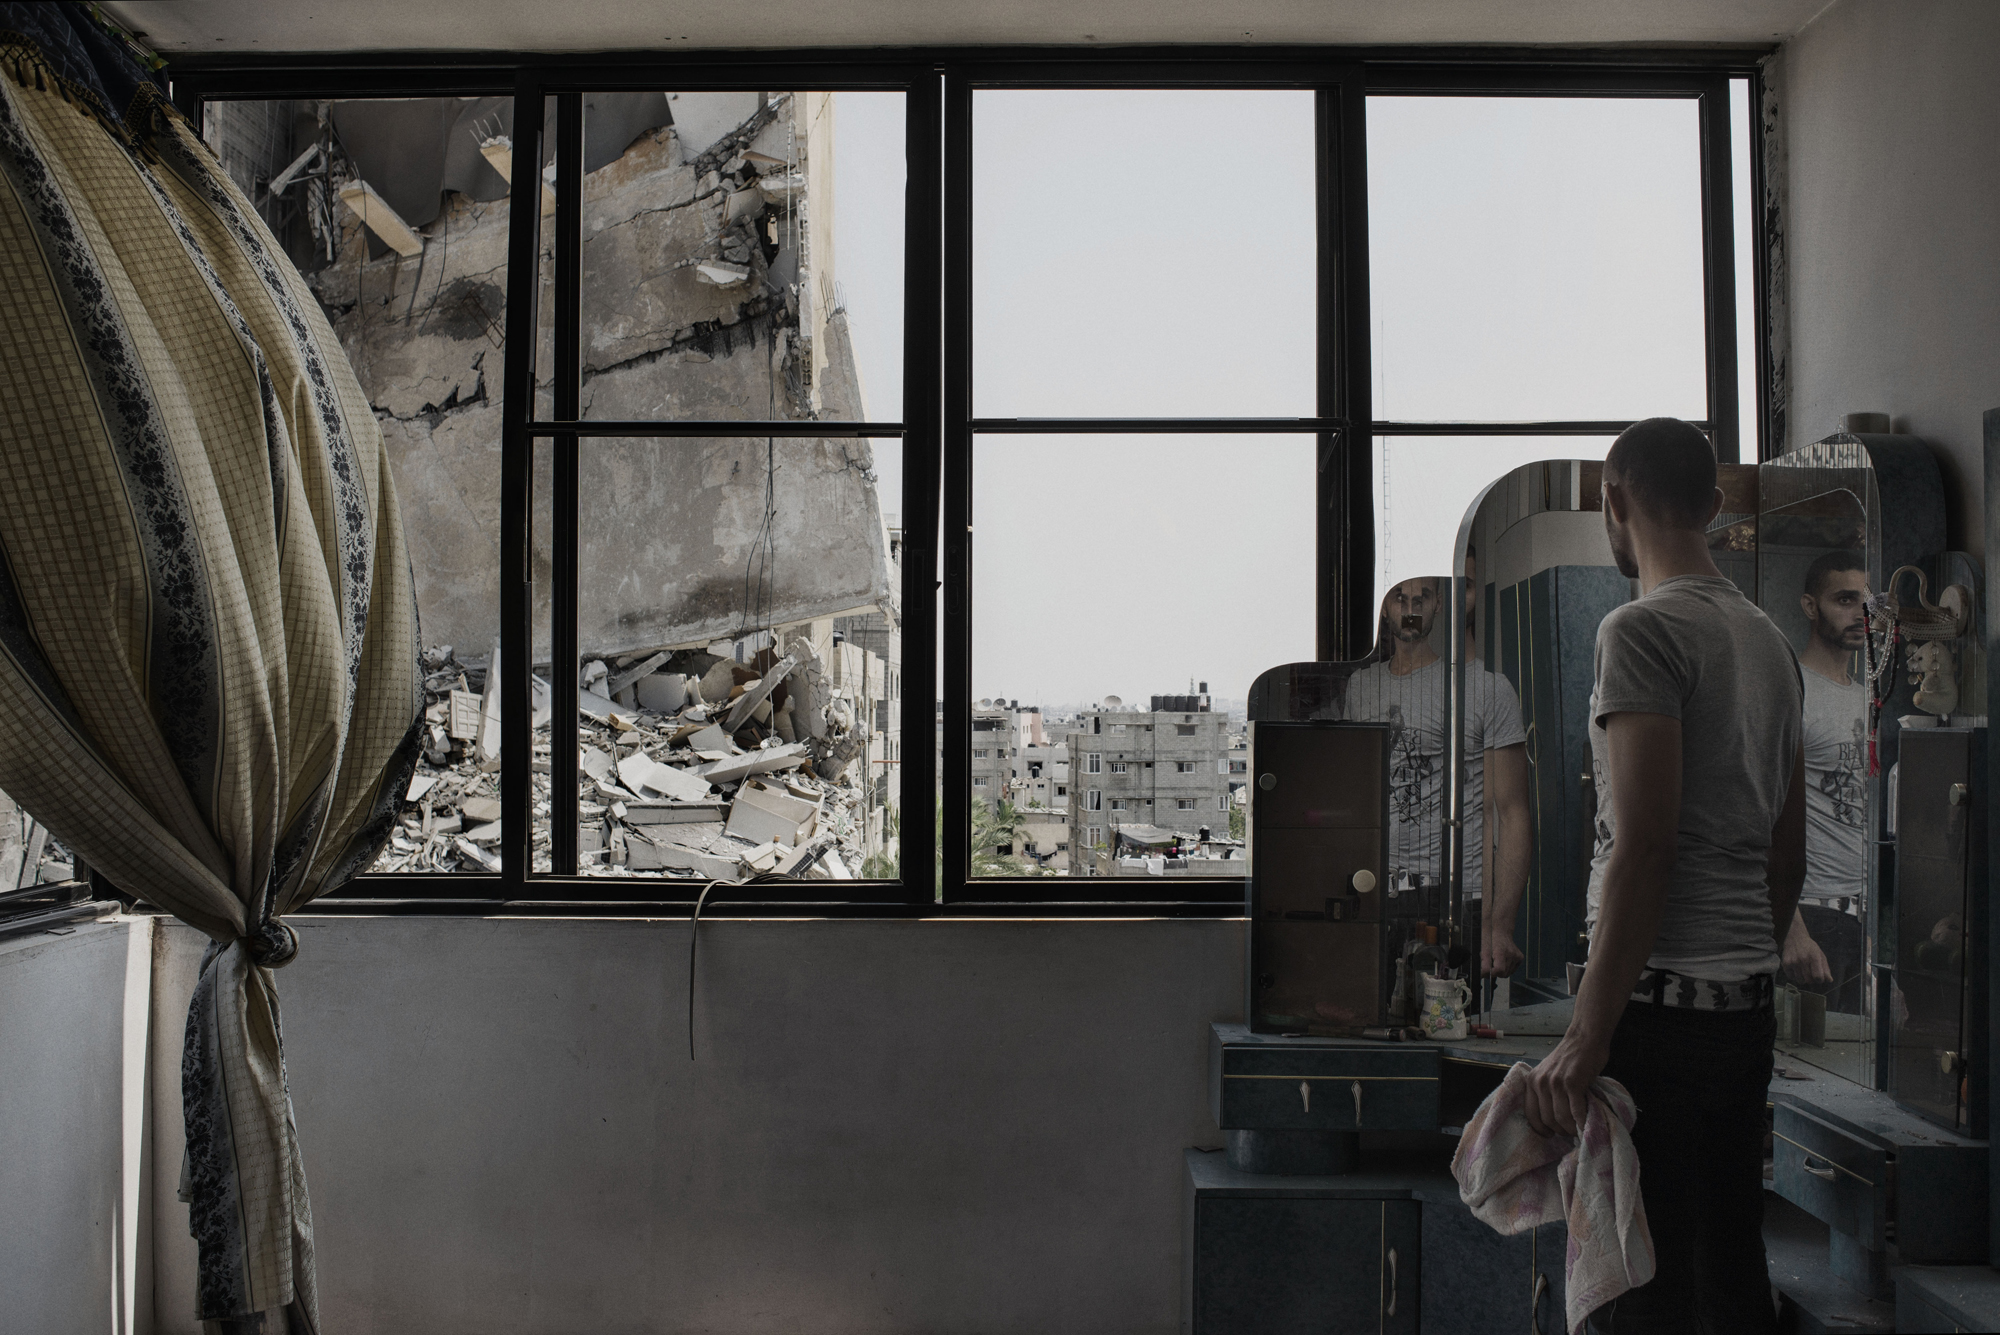 A Palestinian man looks through the window of his house to buildings damaged by an overnight airstrike in Gaza City, July 22, 2014.